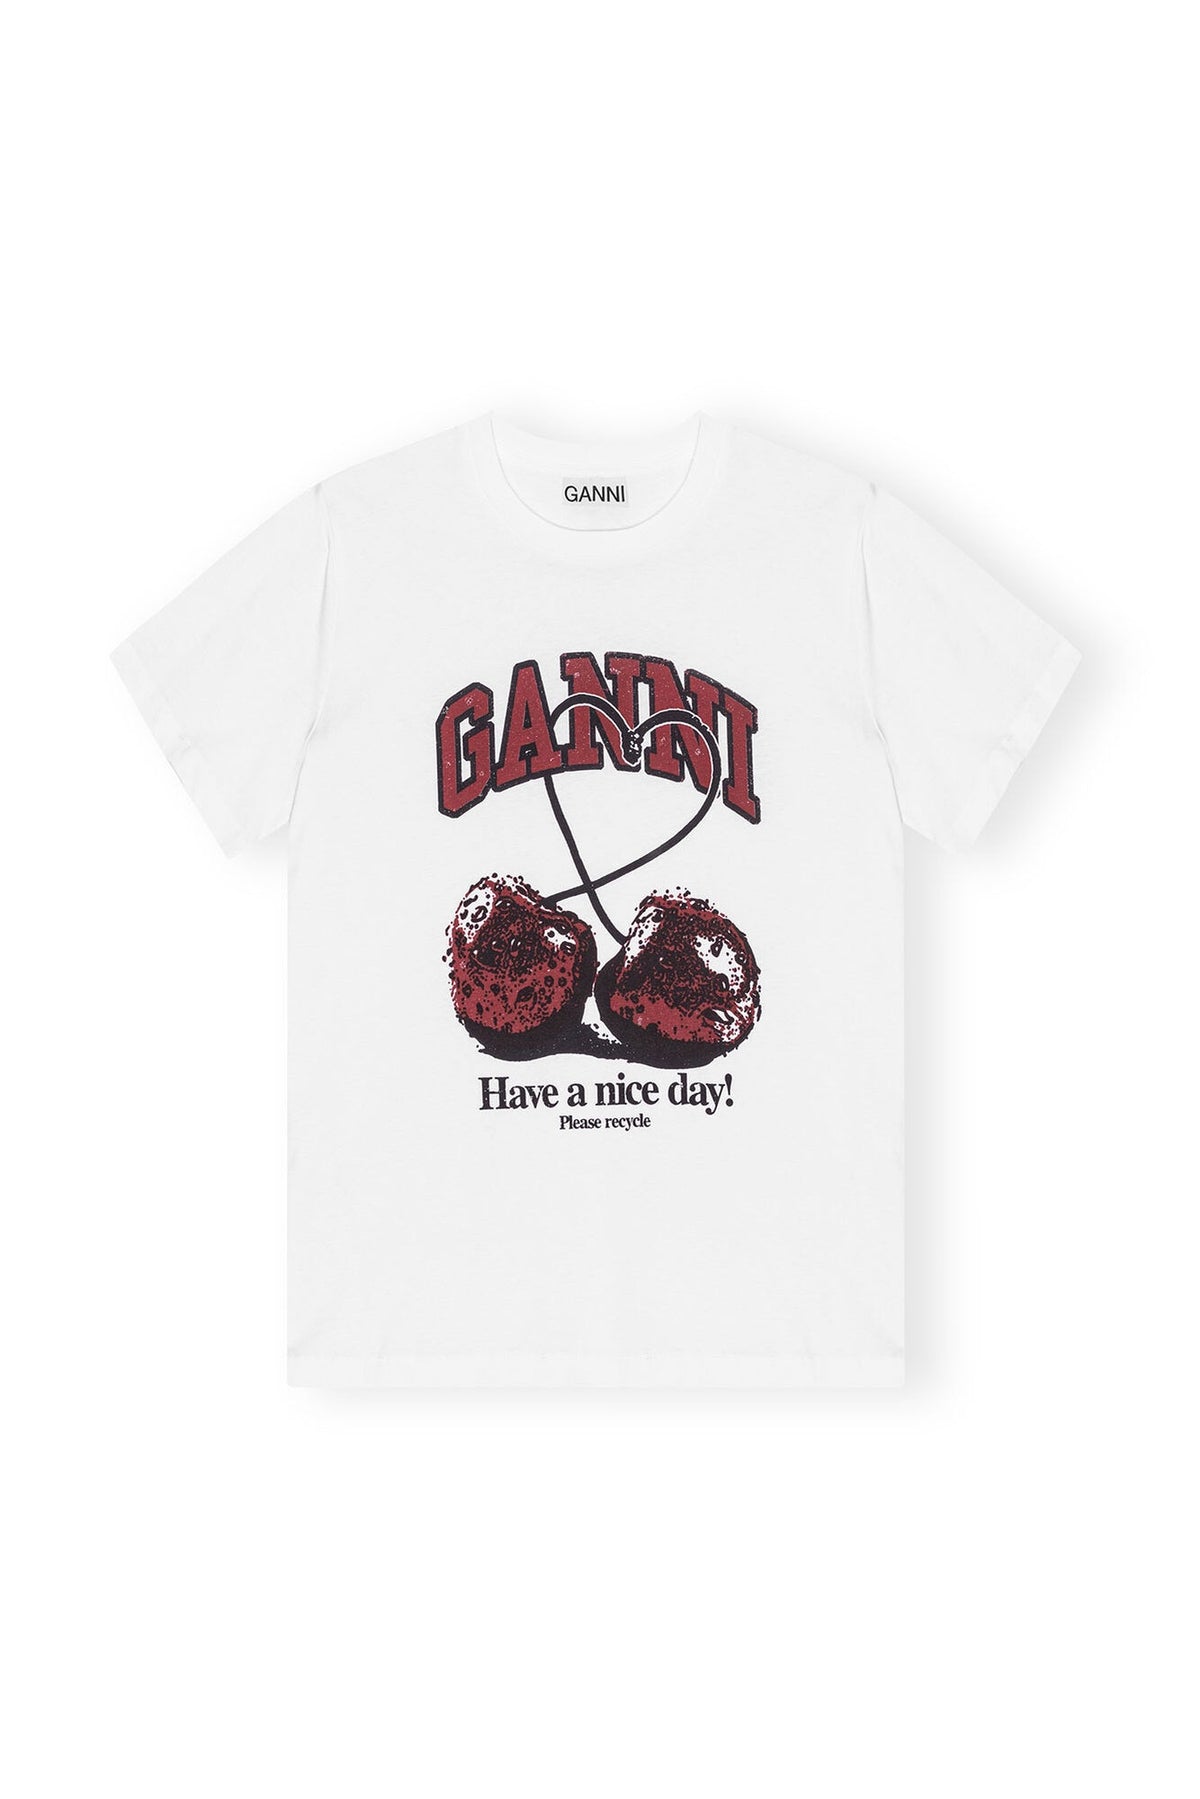 GANNI T3860 Cherry Relaxed Tee in White